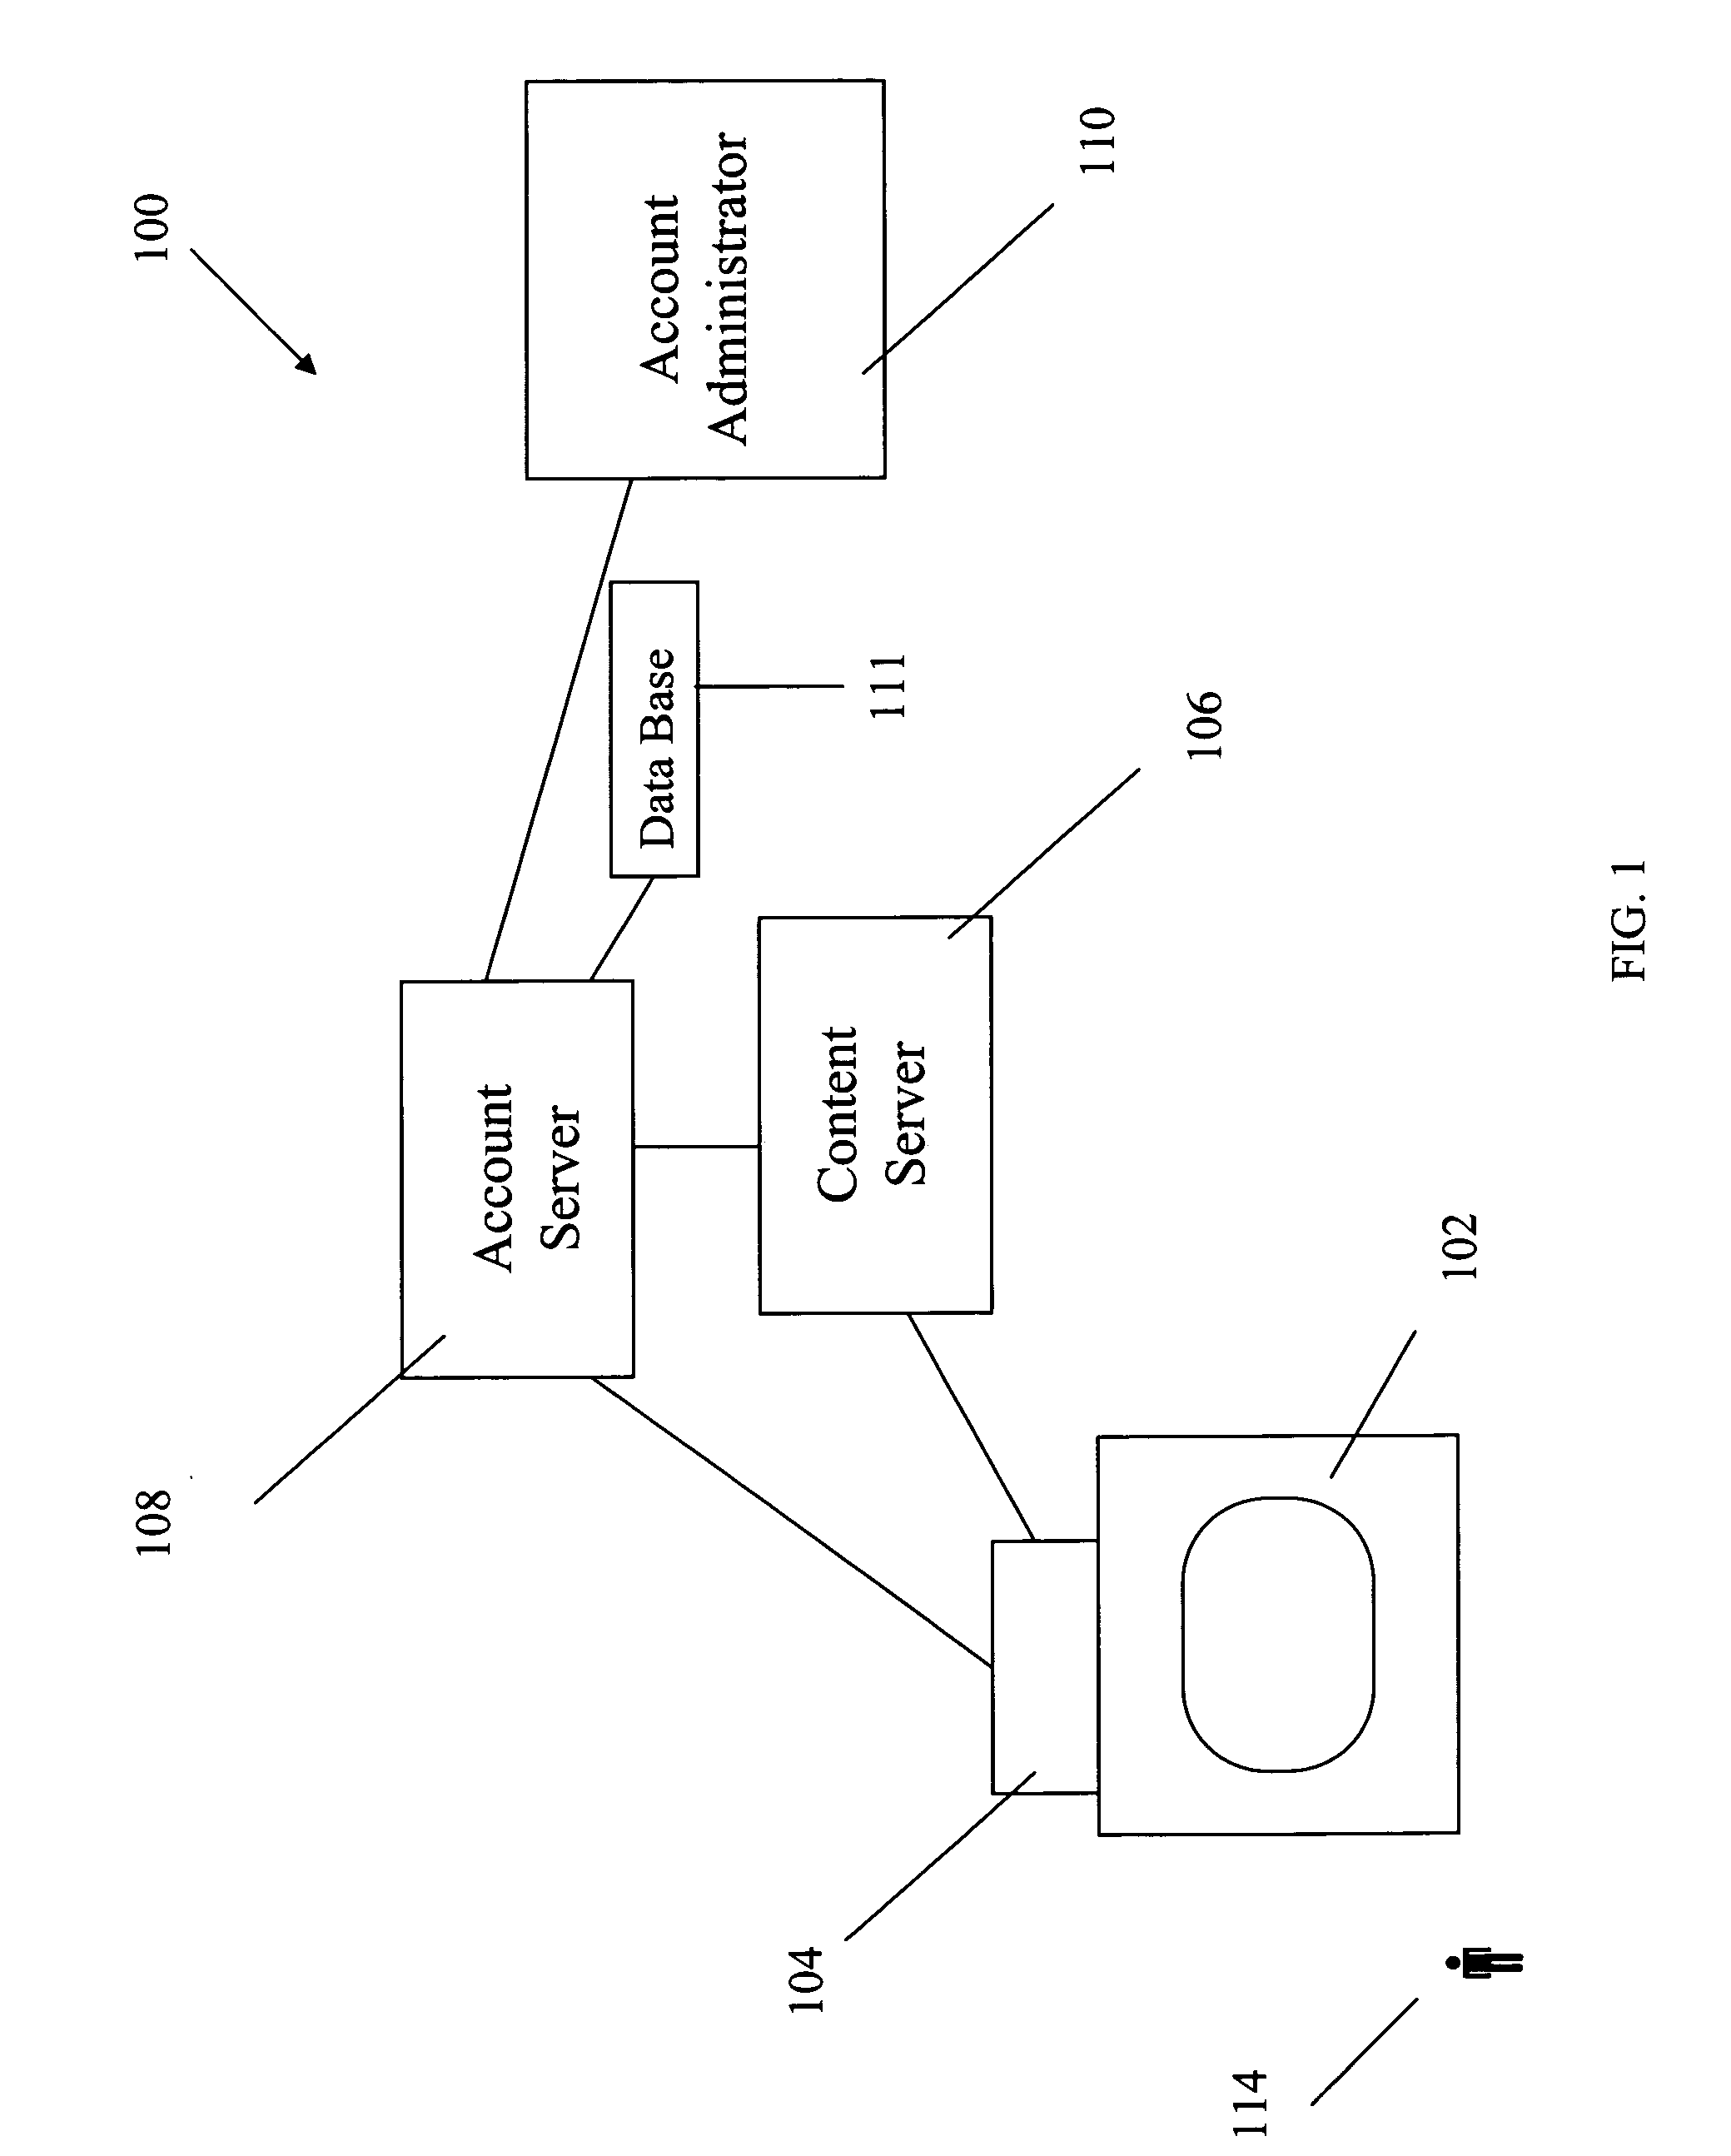 Internet protocol television authorization filtering